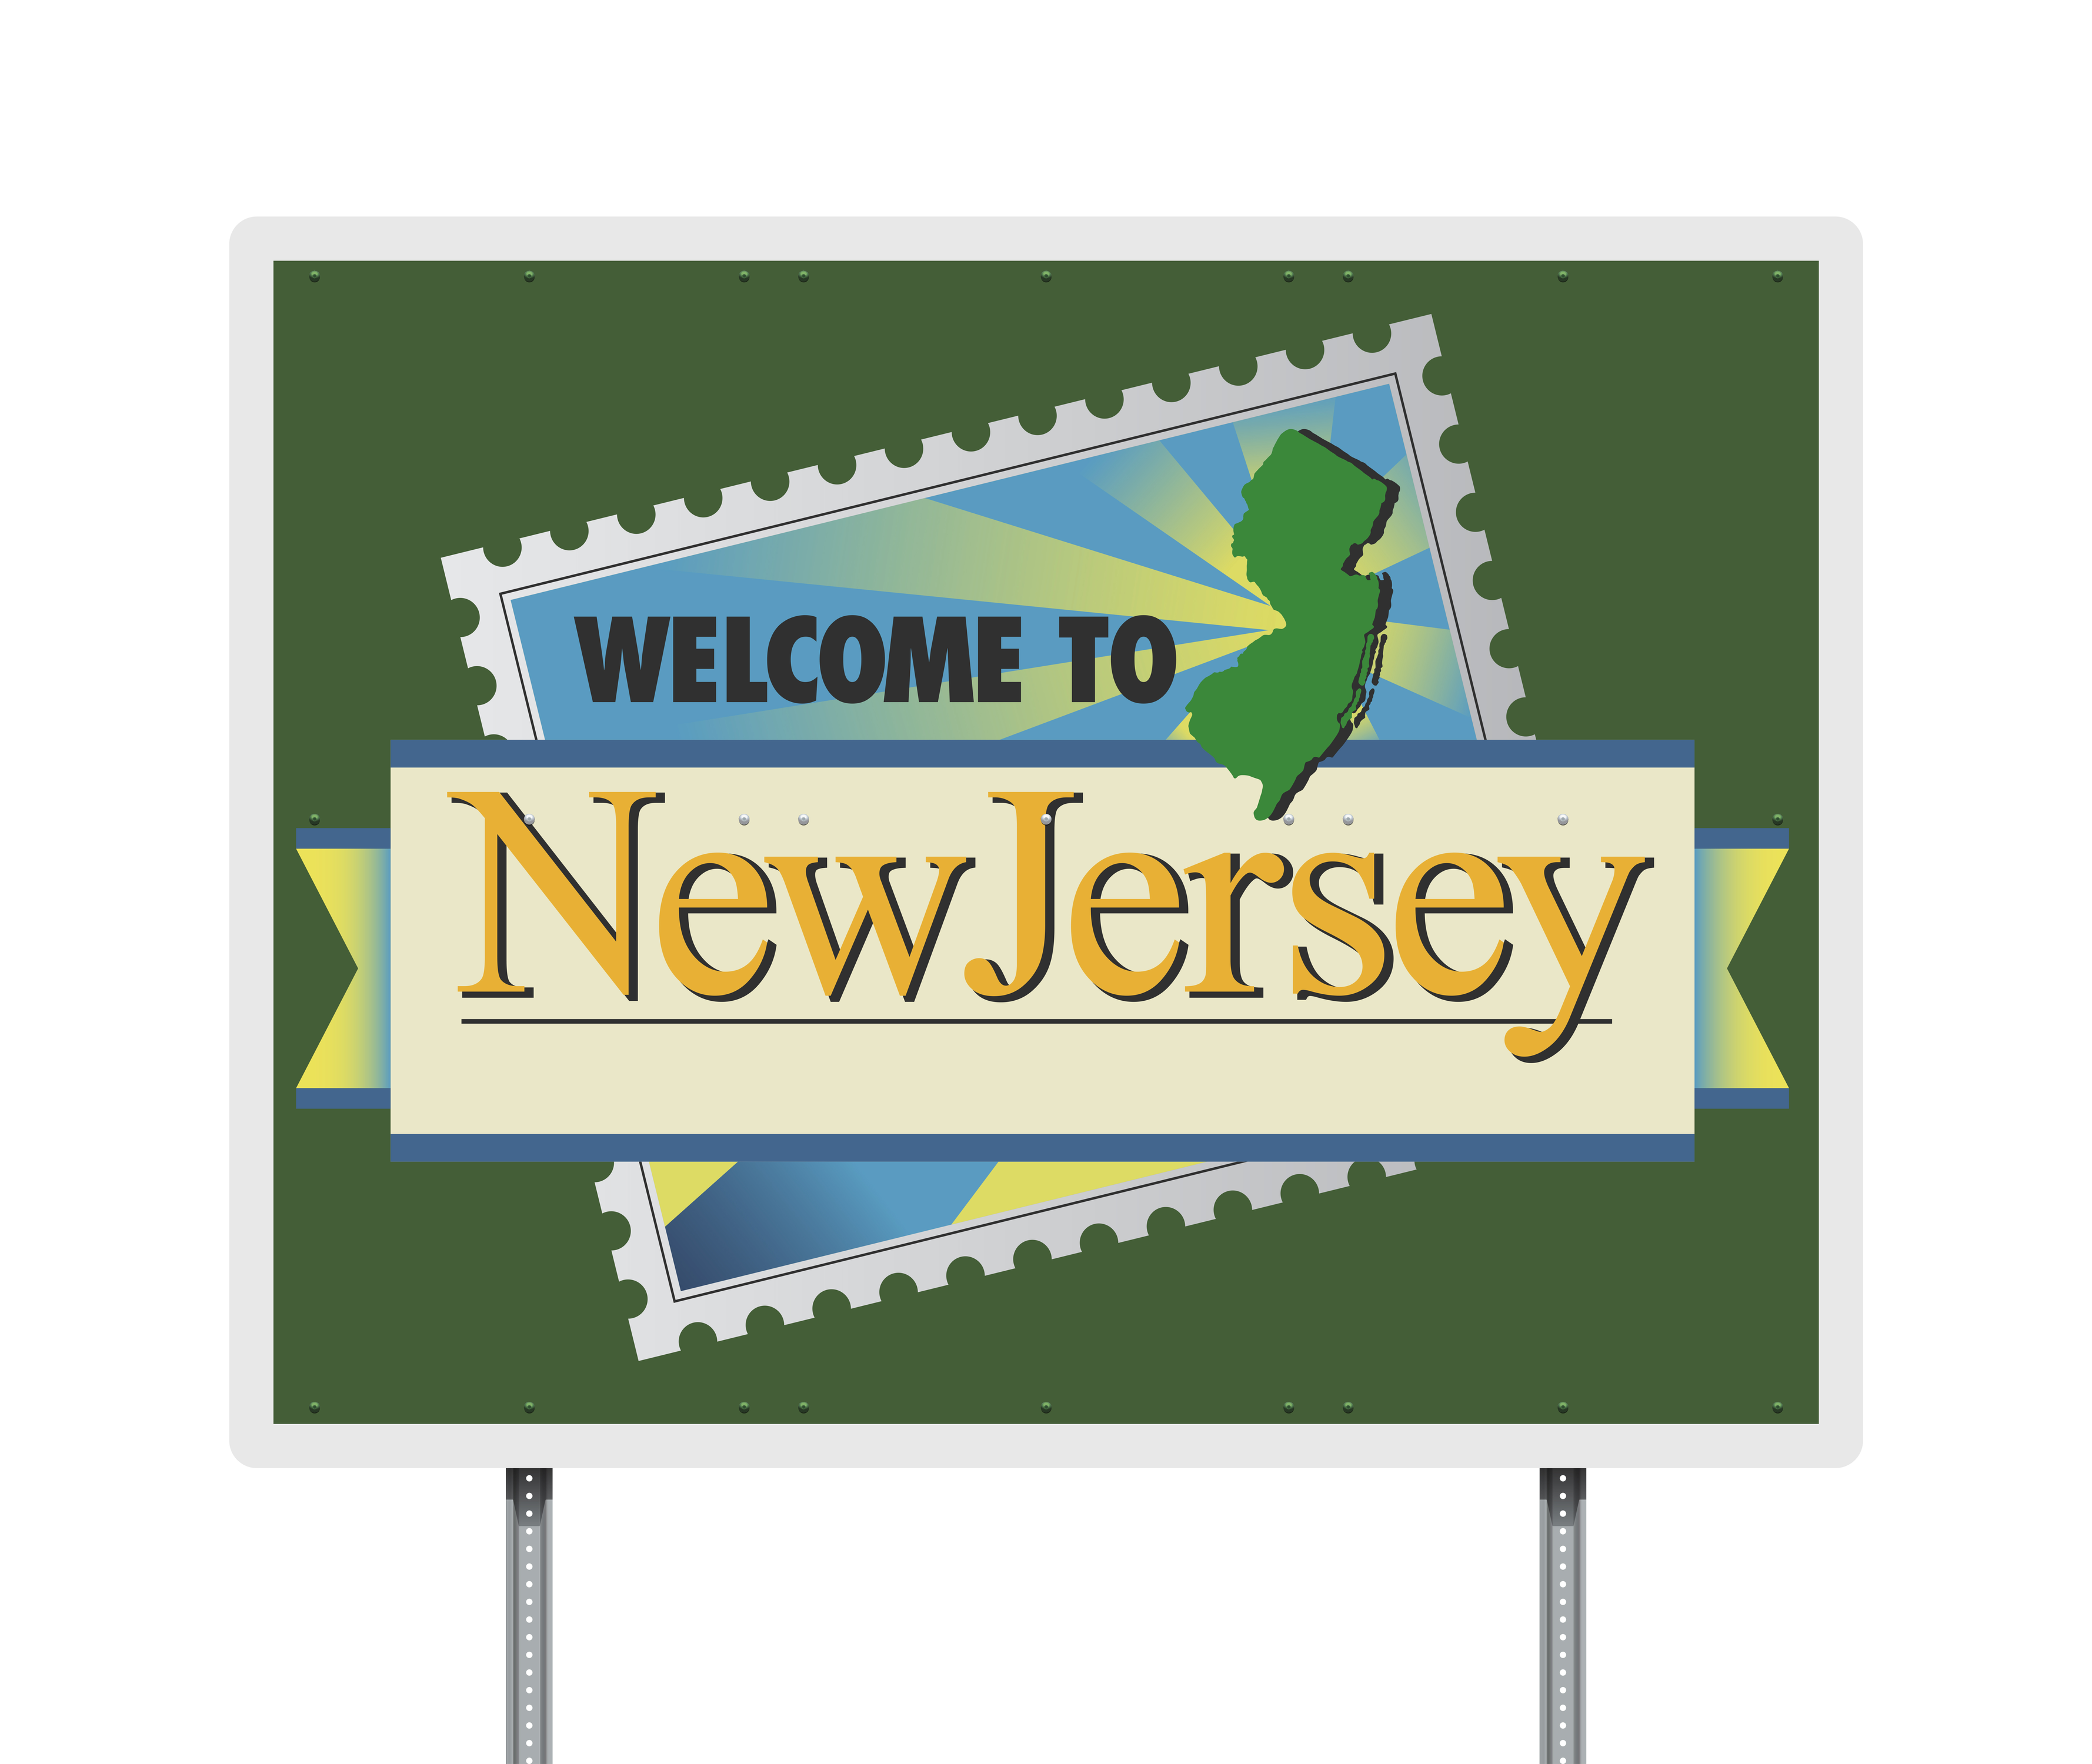 Wallet Hub Dubs New Jersey the Least Patriotic State